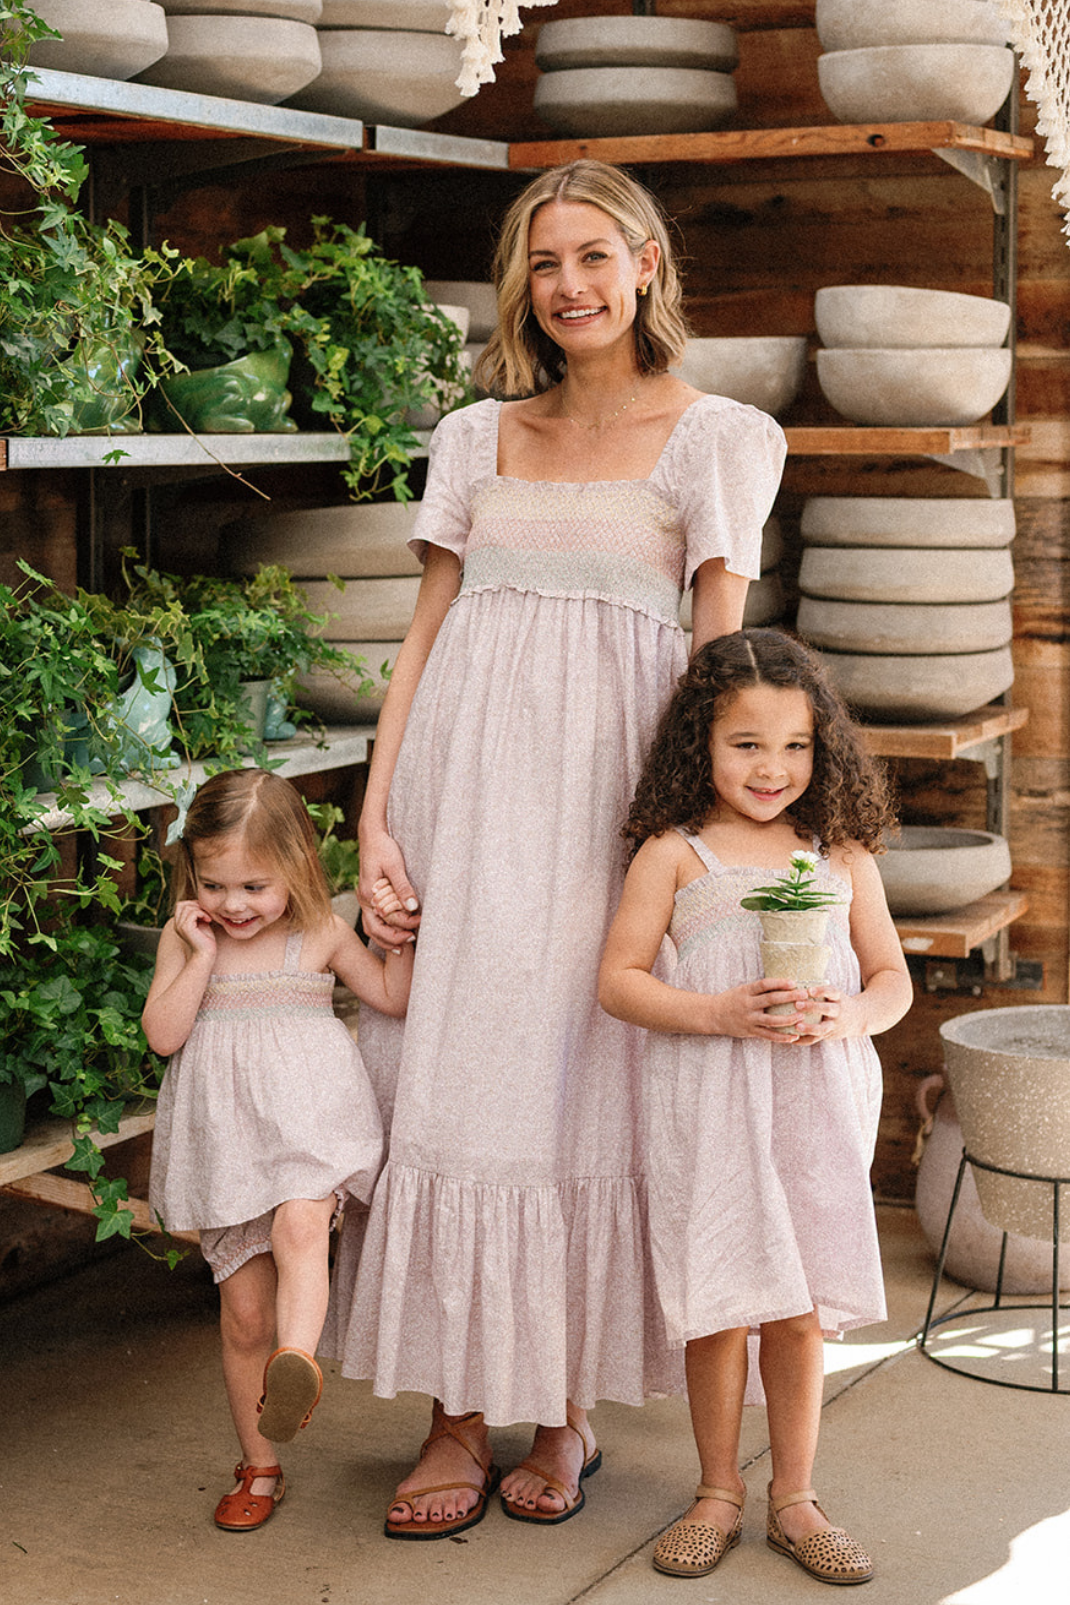 Lifestyle image of a mother and her two daughters all wearing pieces in the scattered blooms print